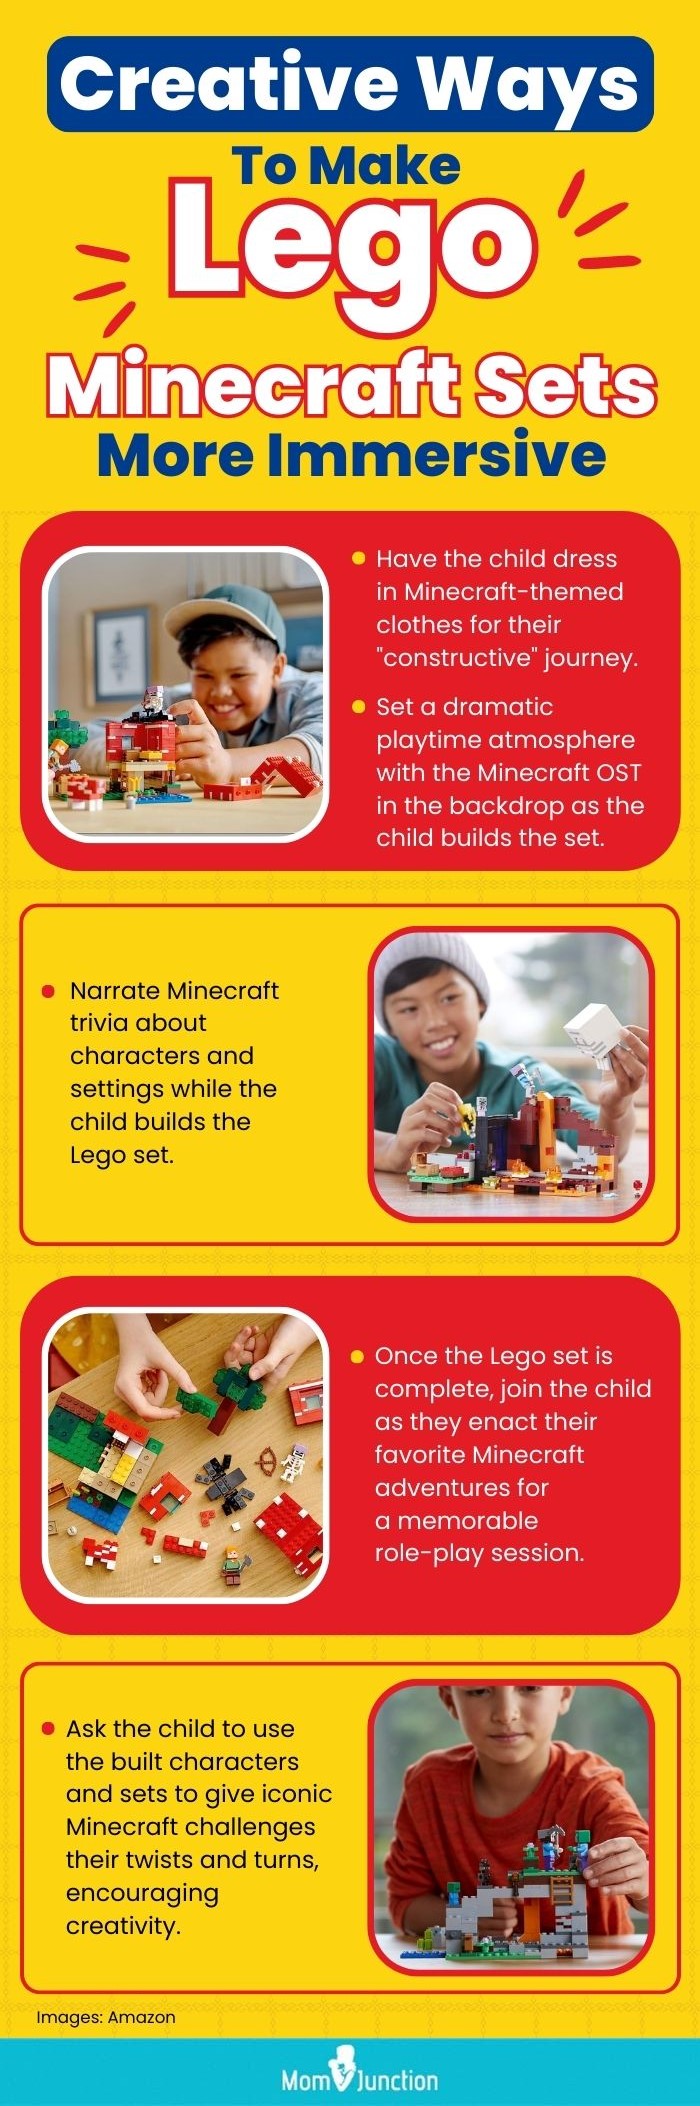 Creative Ways To Make Lego Minecraft Sets More Immersive (infographic)